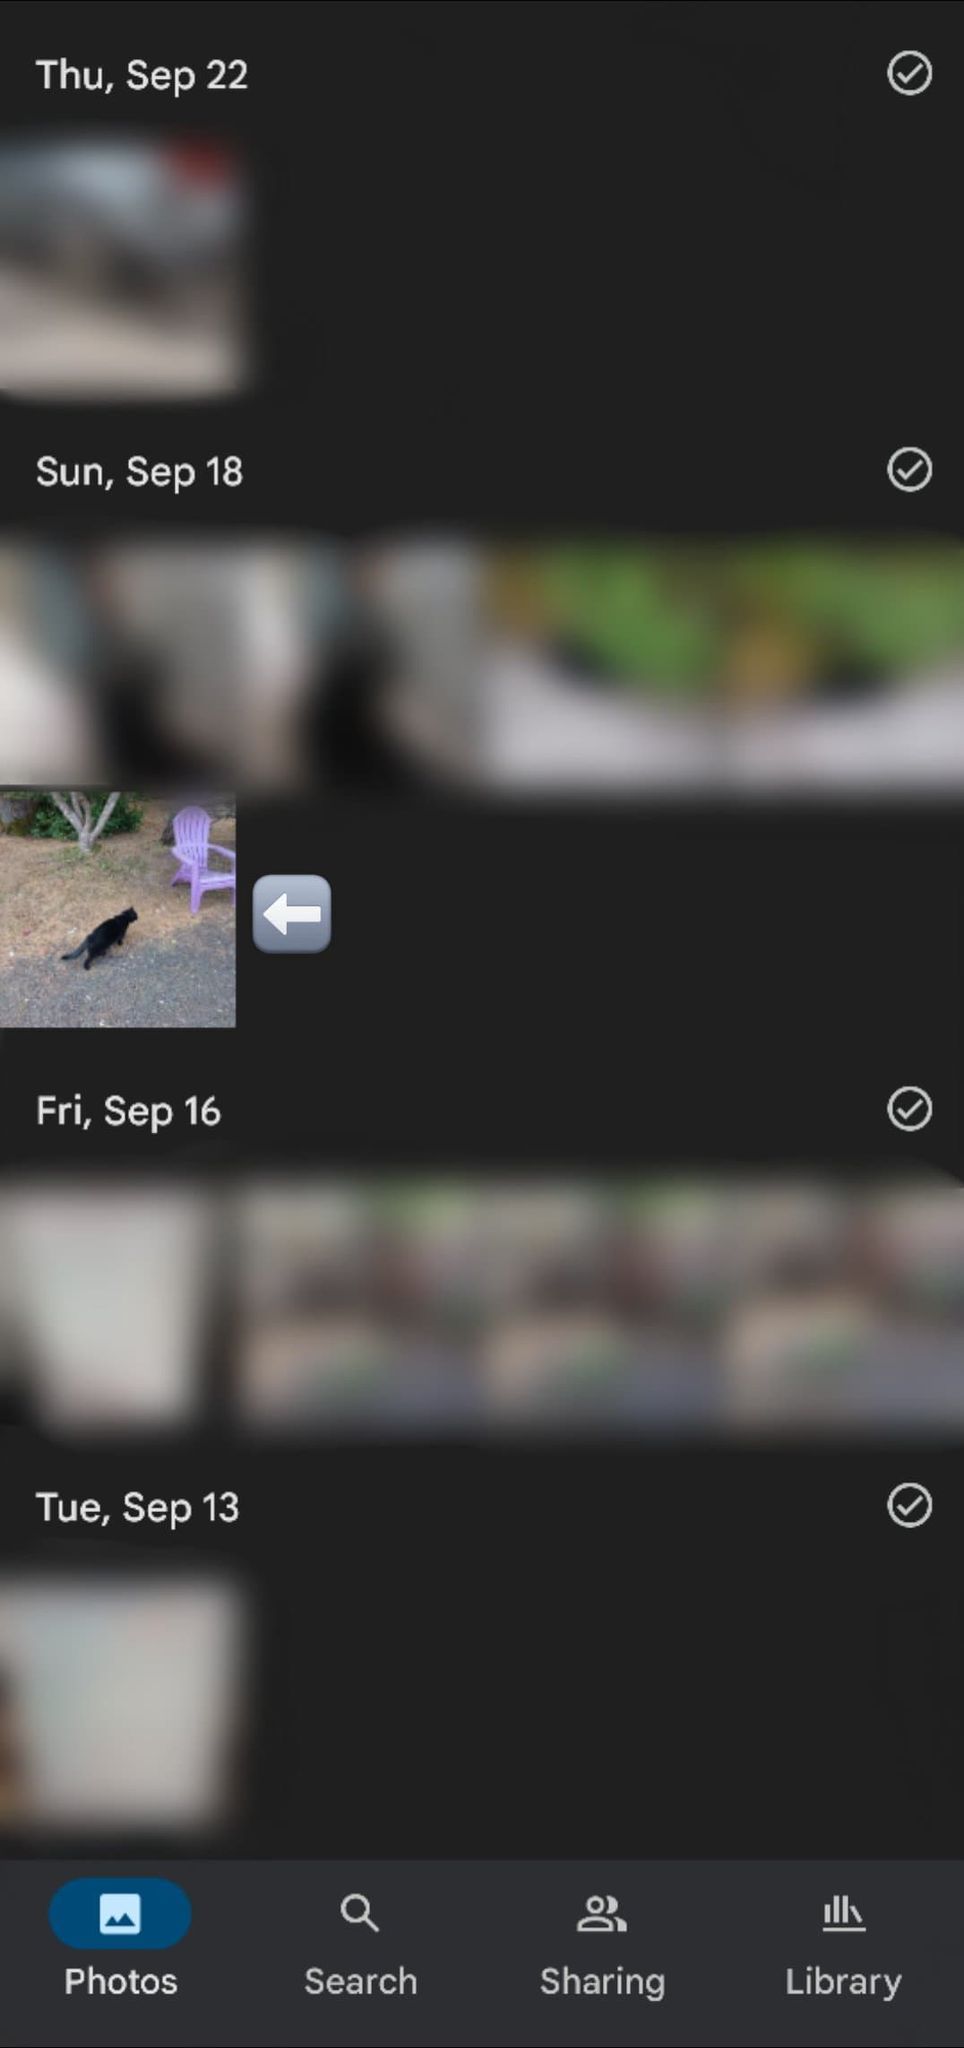 Image shows google photos screen with an arrow pointing to a photo of a black cat.